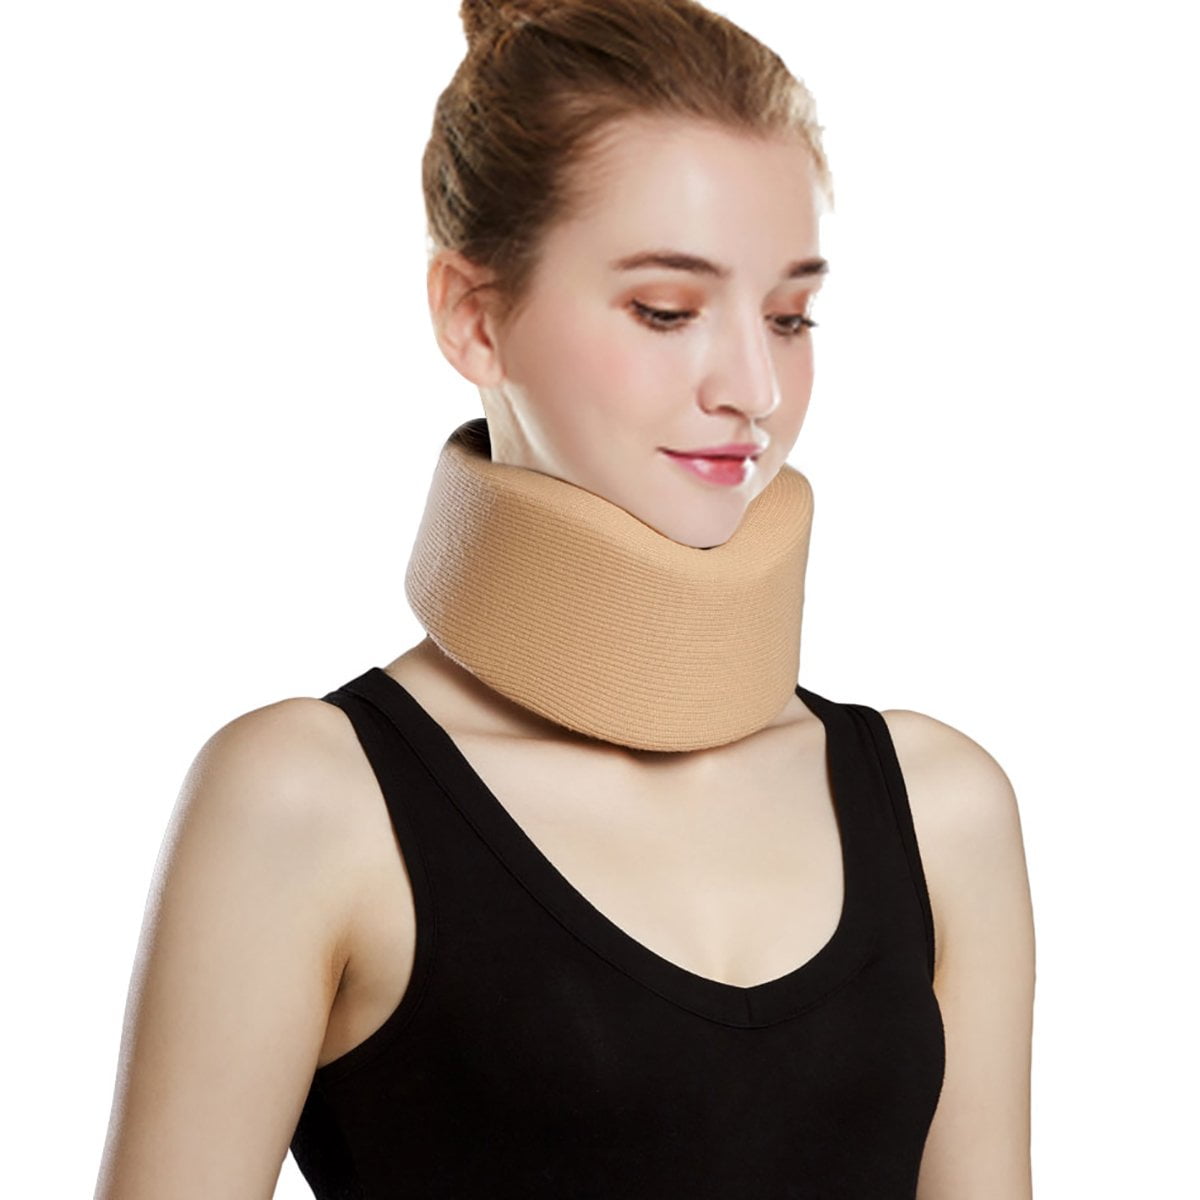 VELPEAU Neck Brace for Neck Pain and Support, Soft Cervical Collar for  Sleeping, Vertebrae Whiplash Wrap Aligns, Stabilizes & Relieves Pressure in